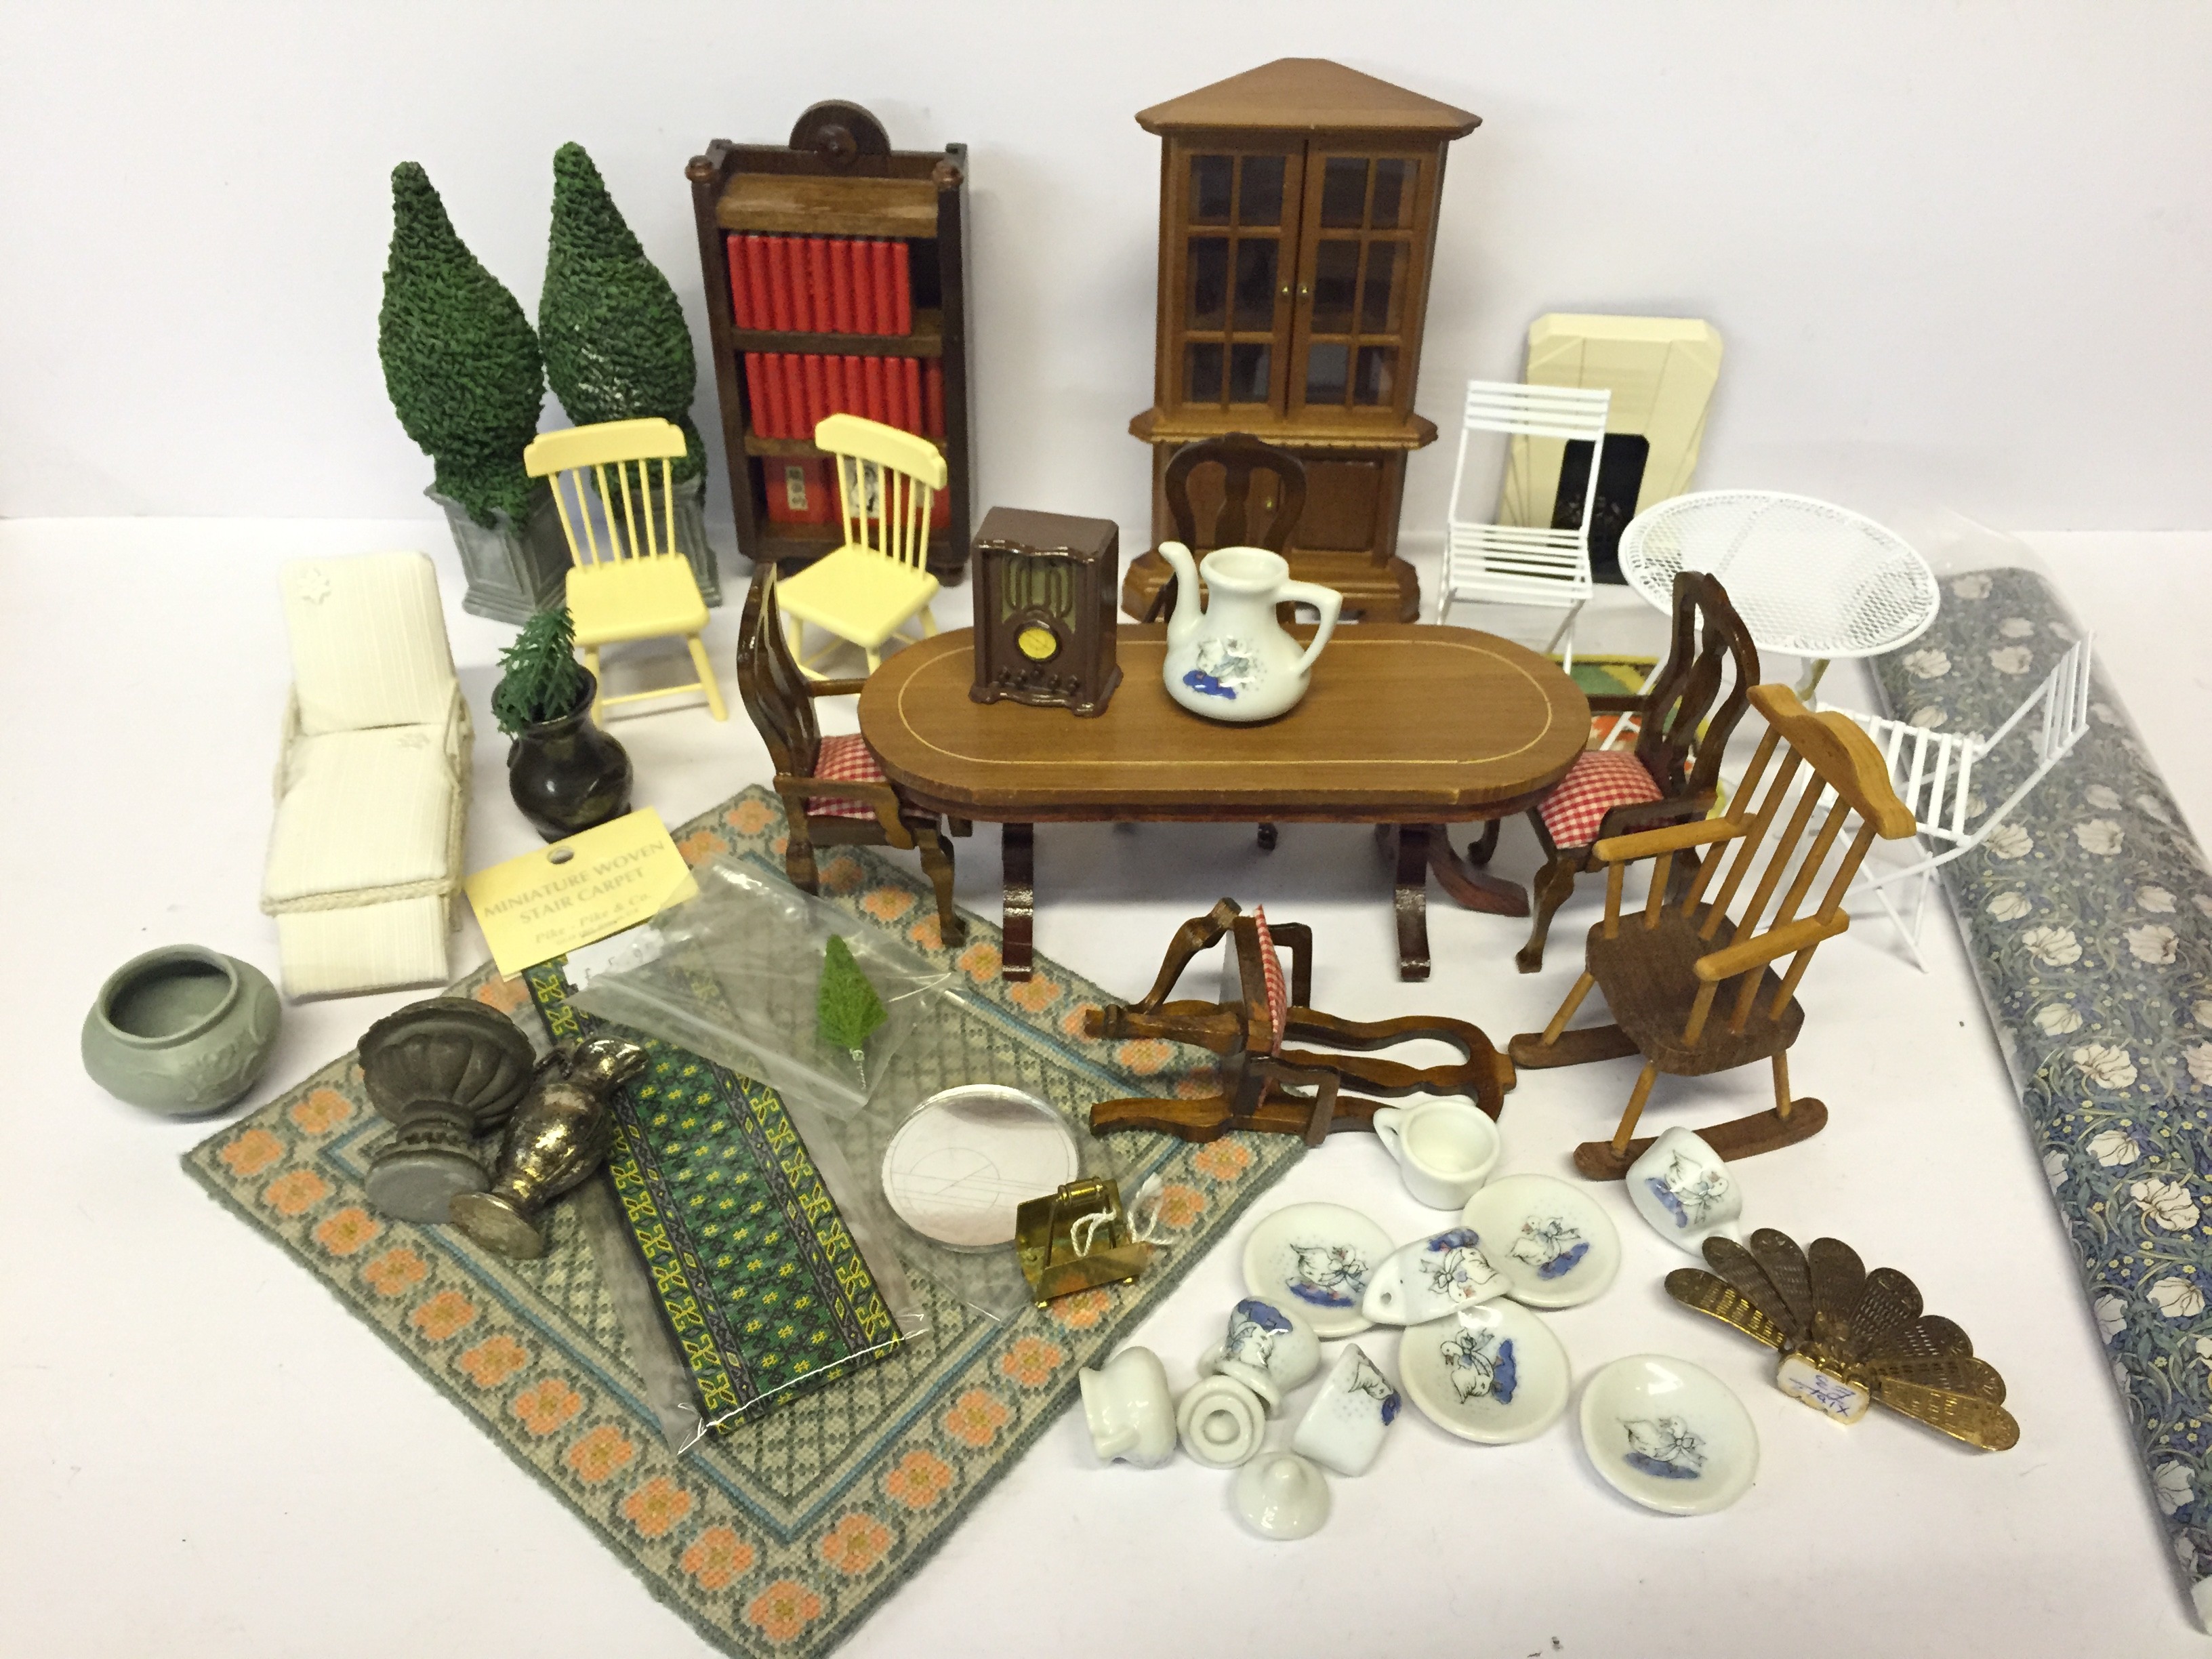 Quantity of Art Deco style doll's house furniture, accessories and lighting,